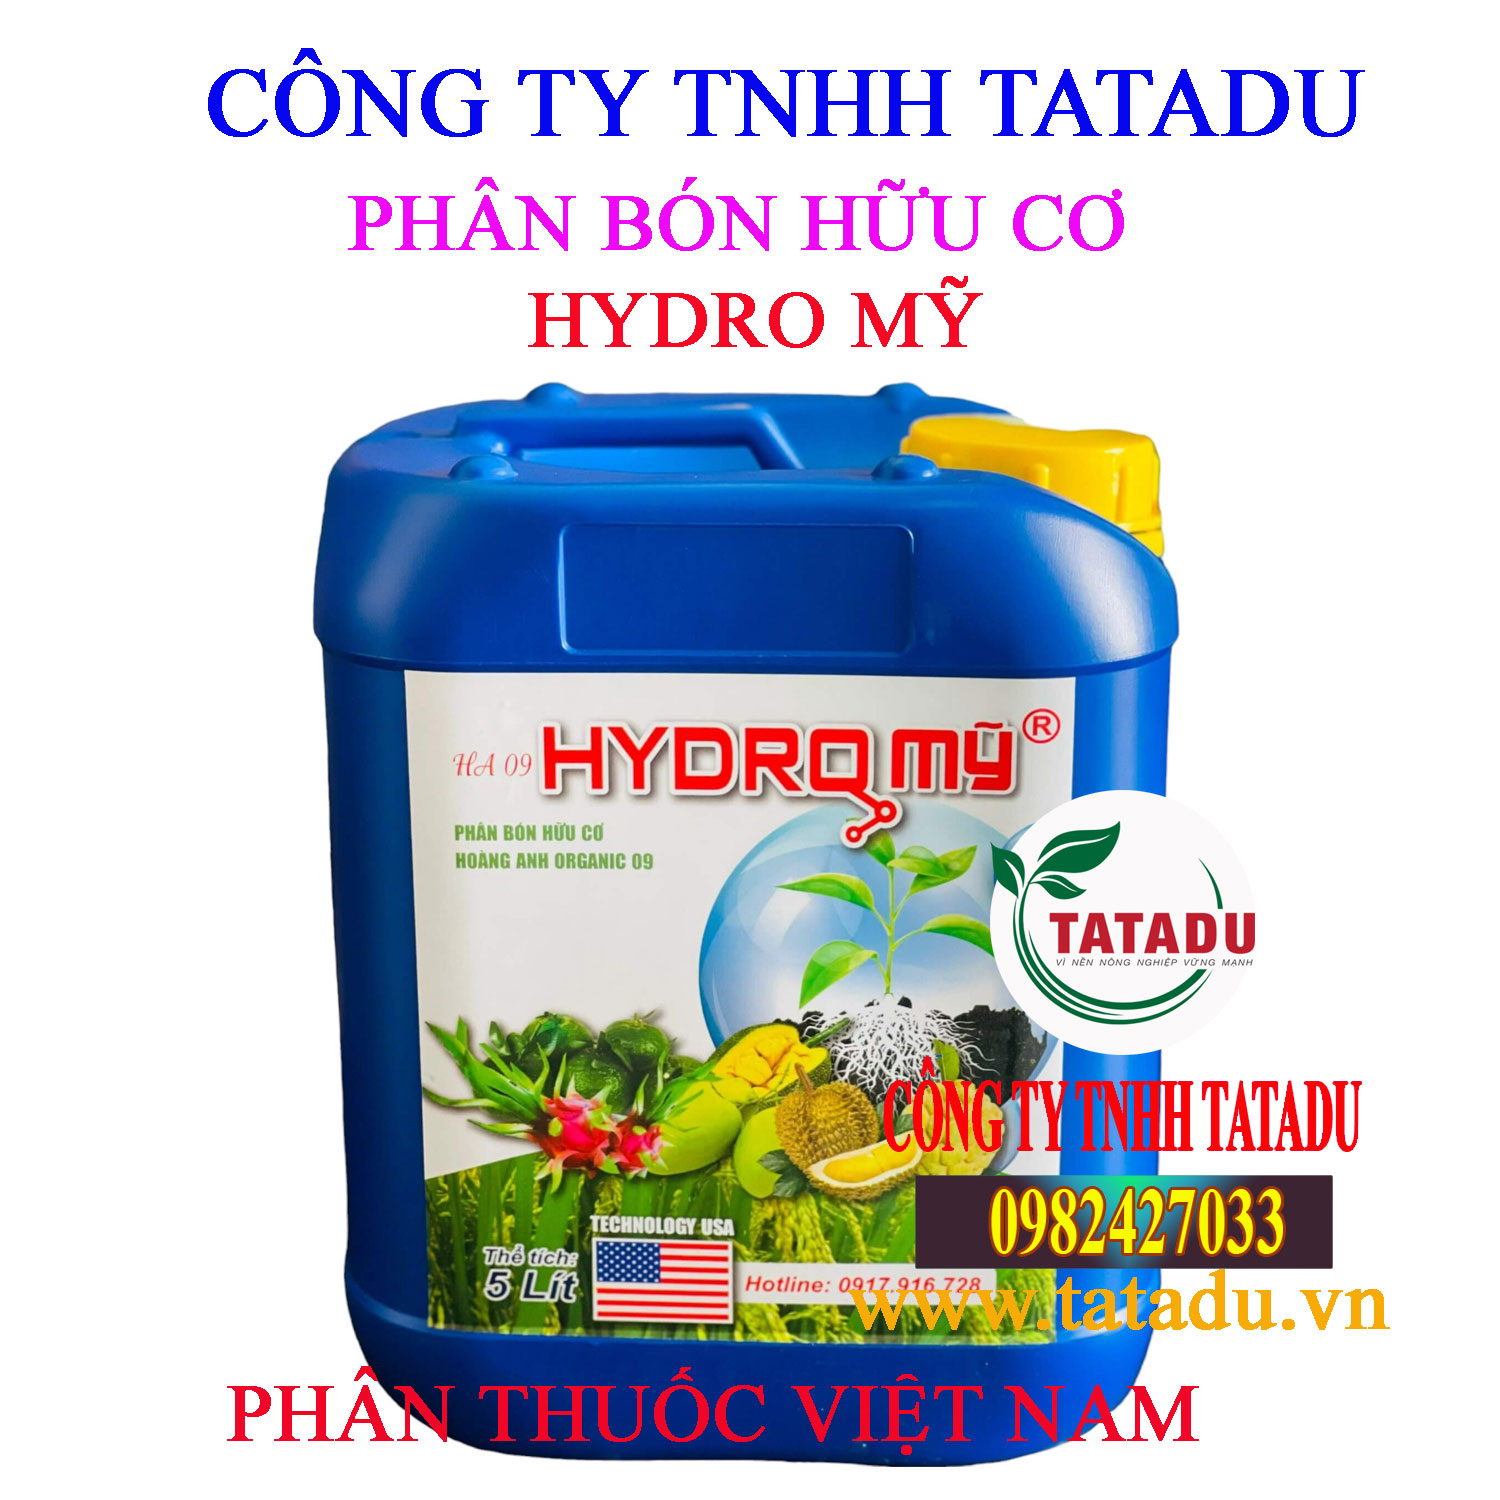 HYDRO MY CAN XANH